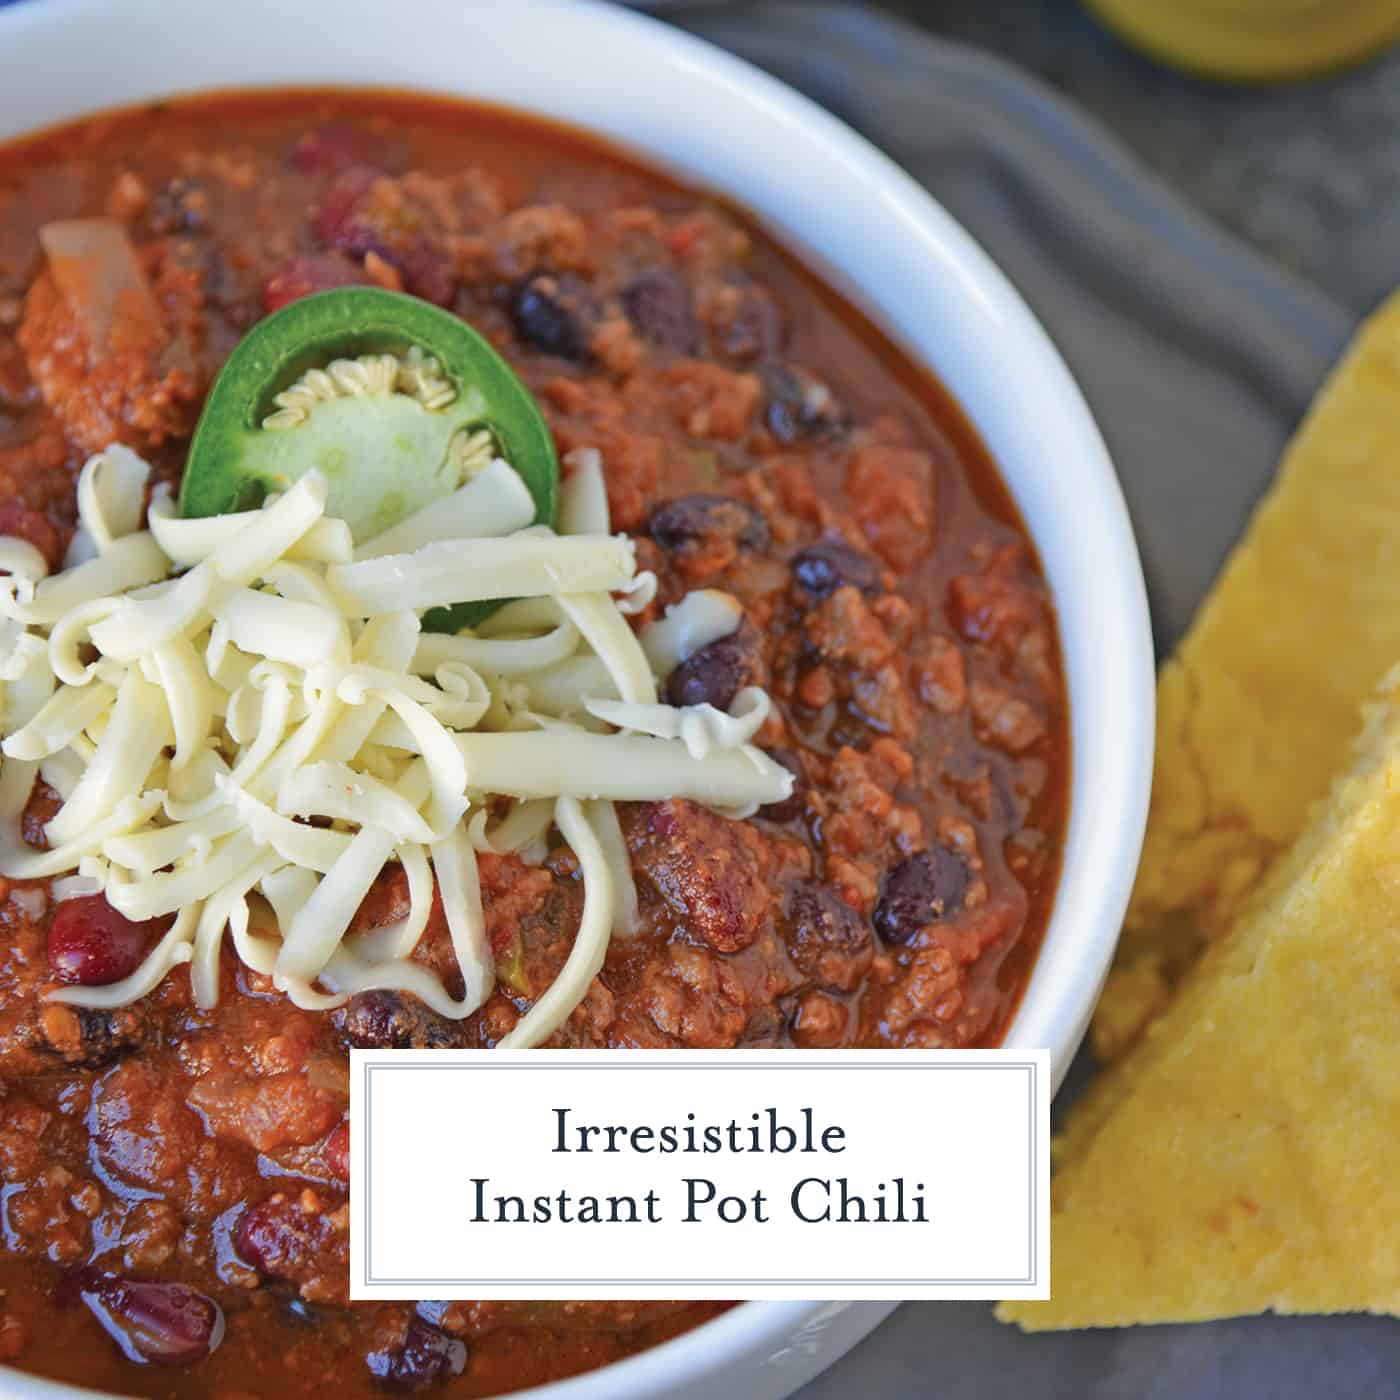 Instant Pot Chili is a gold star chili. A simple chili recipe using jalapeño, chili seasoning, beans and beef ready in just 20 minutes! #instantpotrecipes #intantpotchili #easychilirecipe www.savoryexperiments.com 